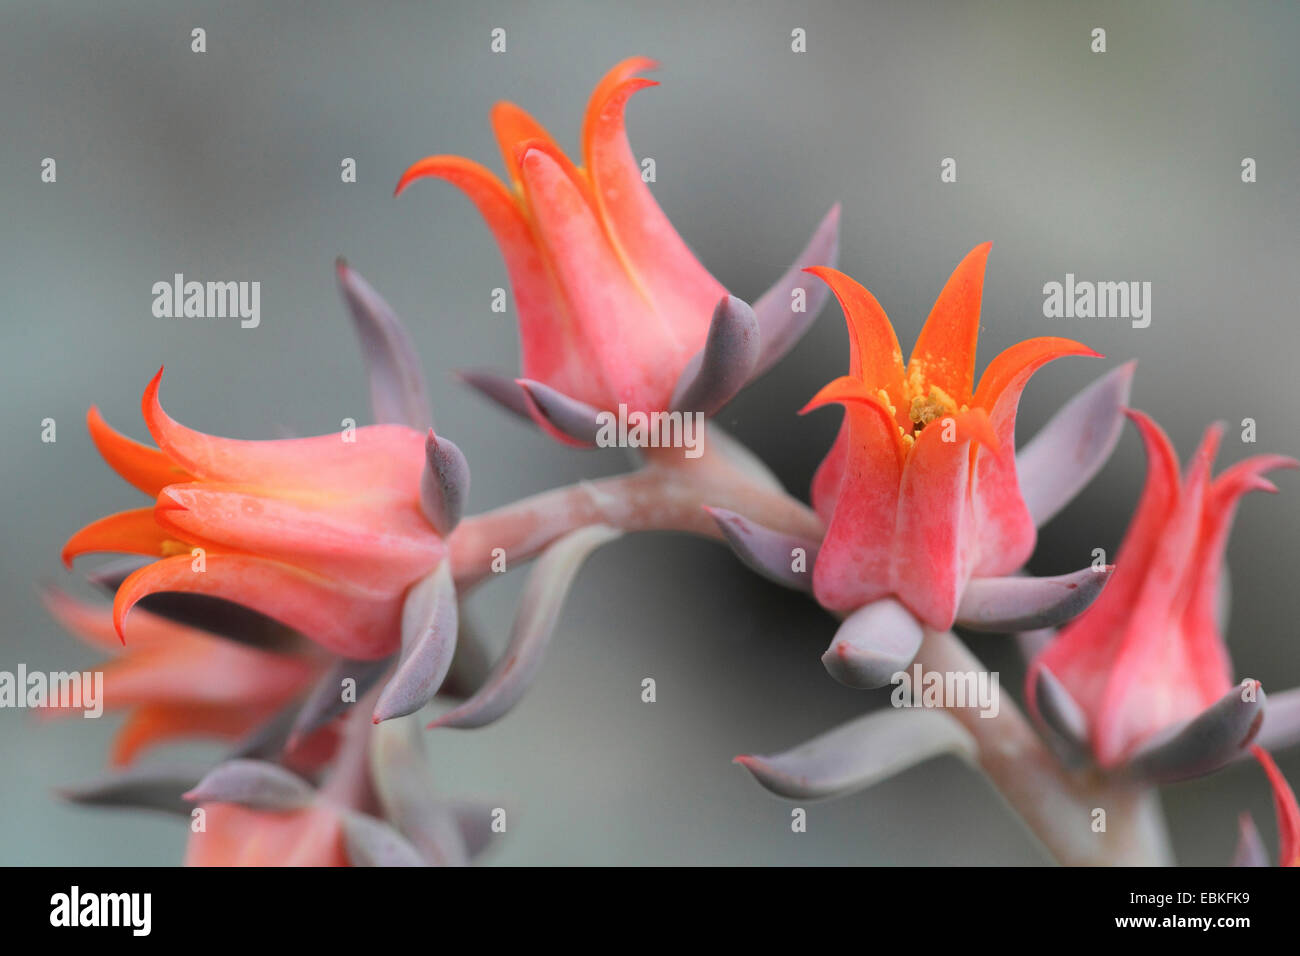 Topsy Turvy Echeveria Runyonii High Resolution Stock Photography And Images Alamy